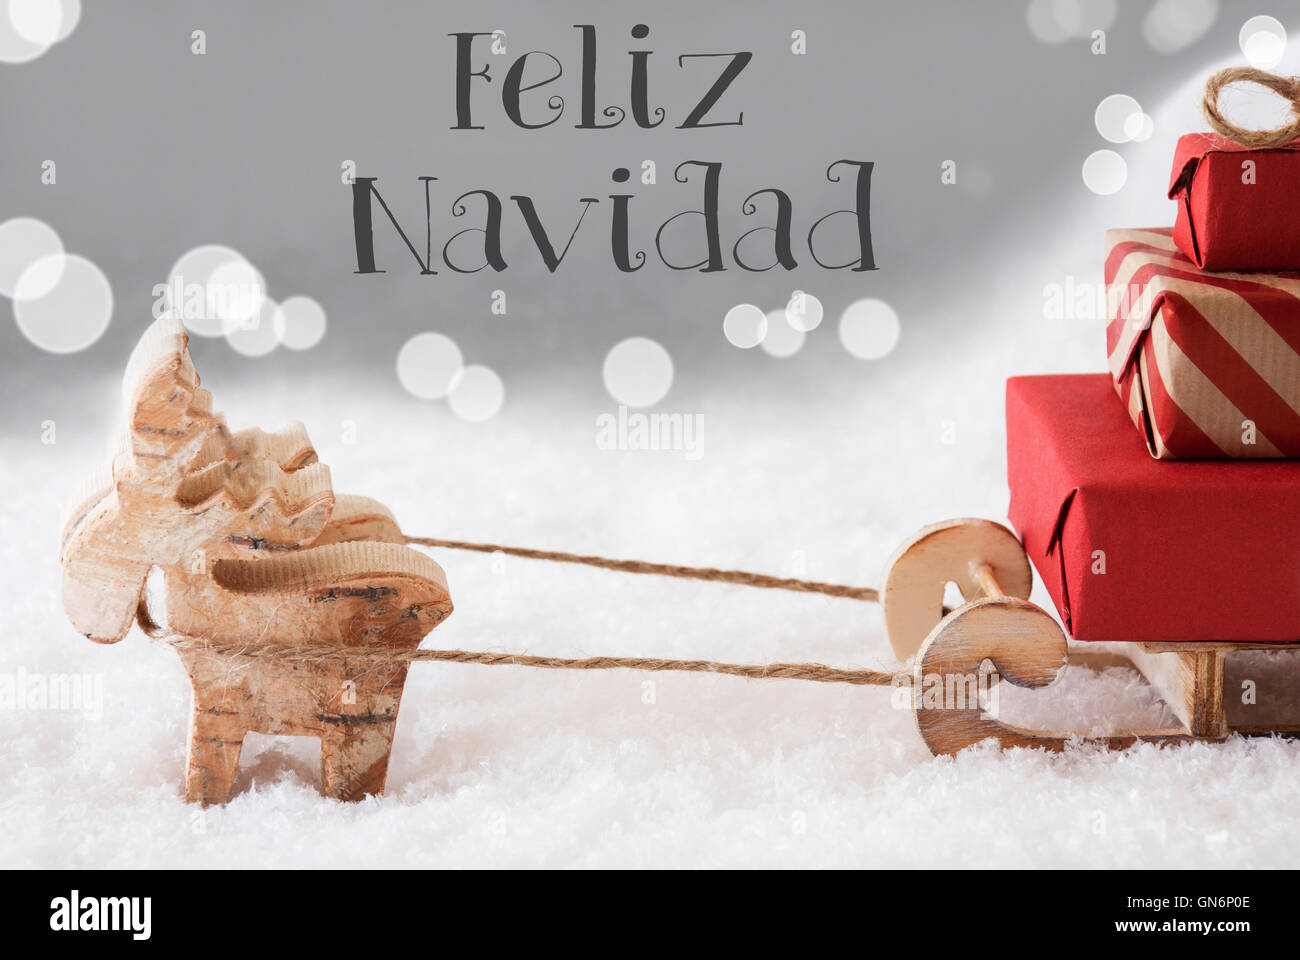 Reindeer With Sled, Silver Background, Feliz Navidad Means Merry Christmas Stock Photo